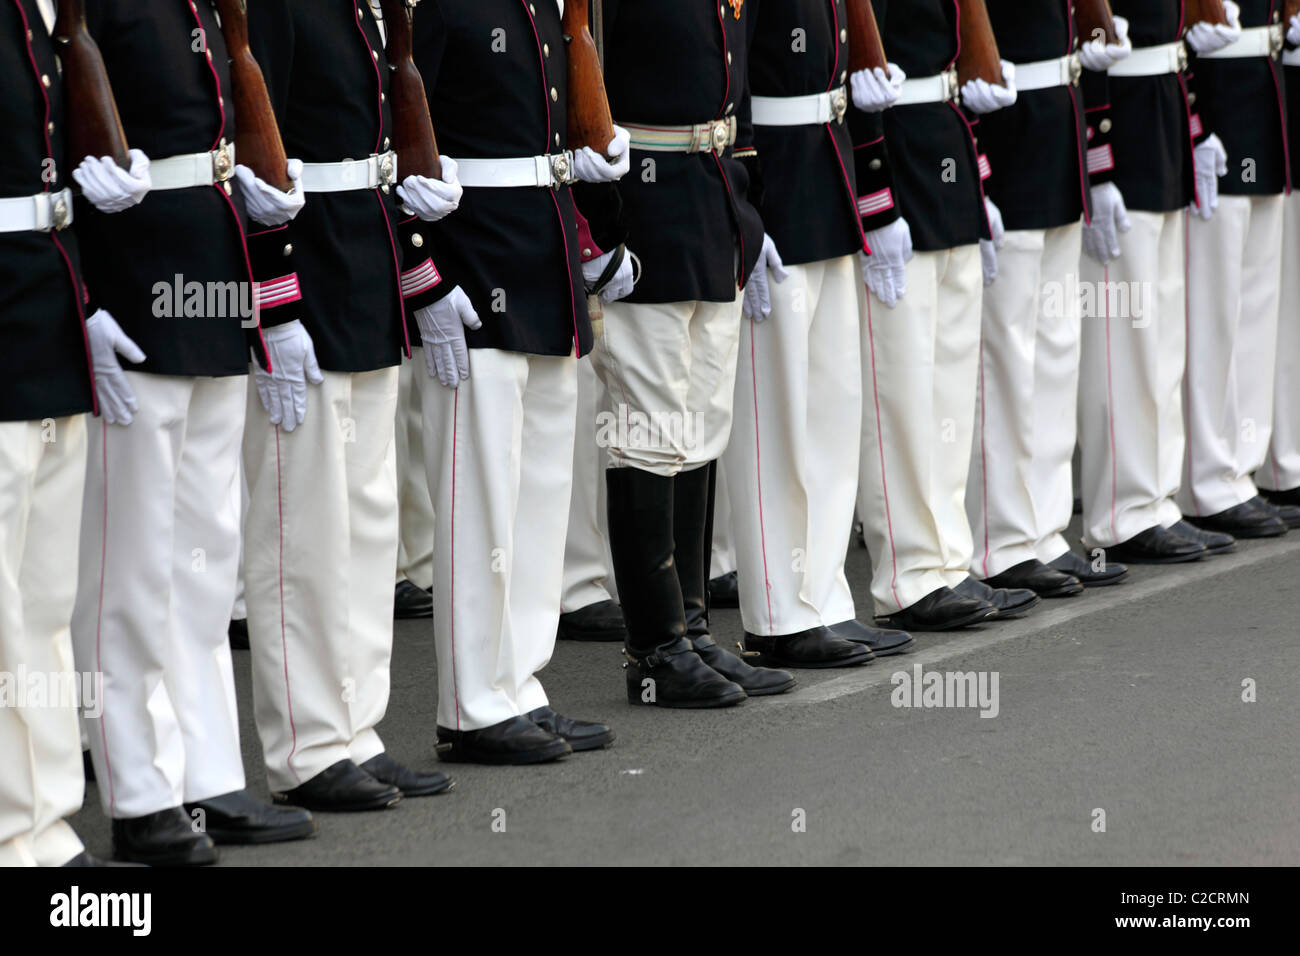 Odd one out! One guard with trousers tucked into his boots while on parade during July 16th anniversary celebrations, La Paz , Bolivia Stock Photo